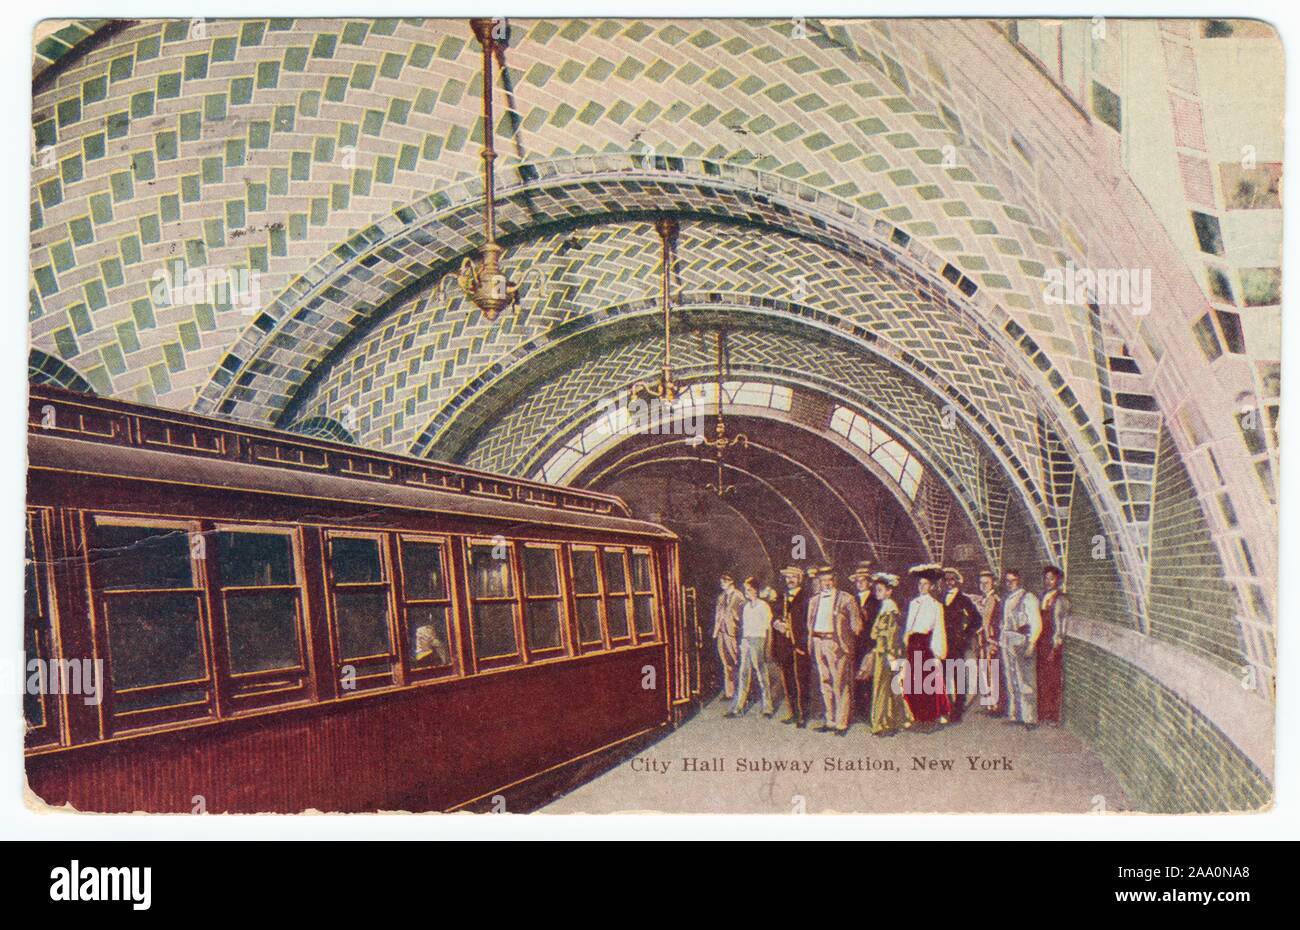 Illustrated postcard of the tiled vaulted ceiling of the City Hall subway station, with people boarding the train, Manhattan, New York City, published by J. Koehler, 1906. From the New York Public Library. () Stock Photo